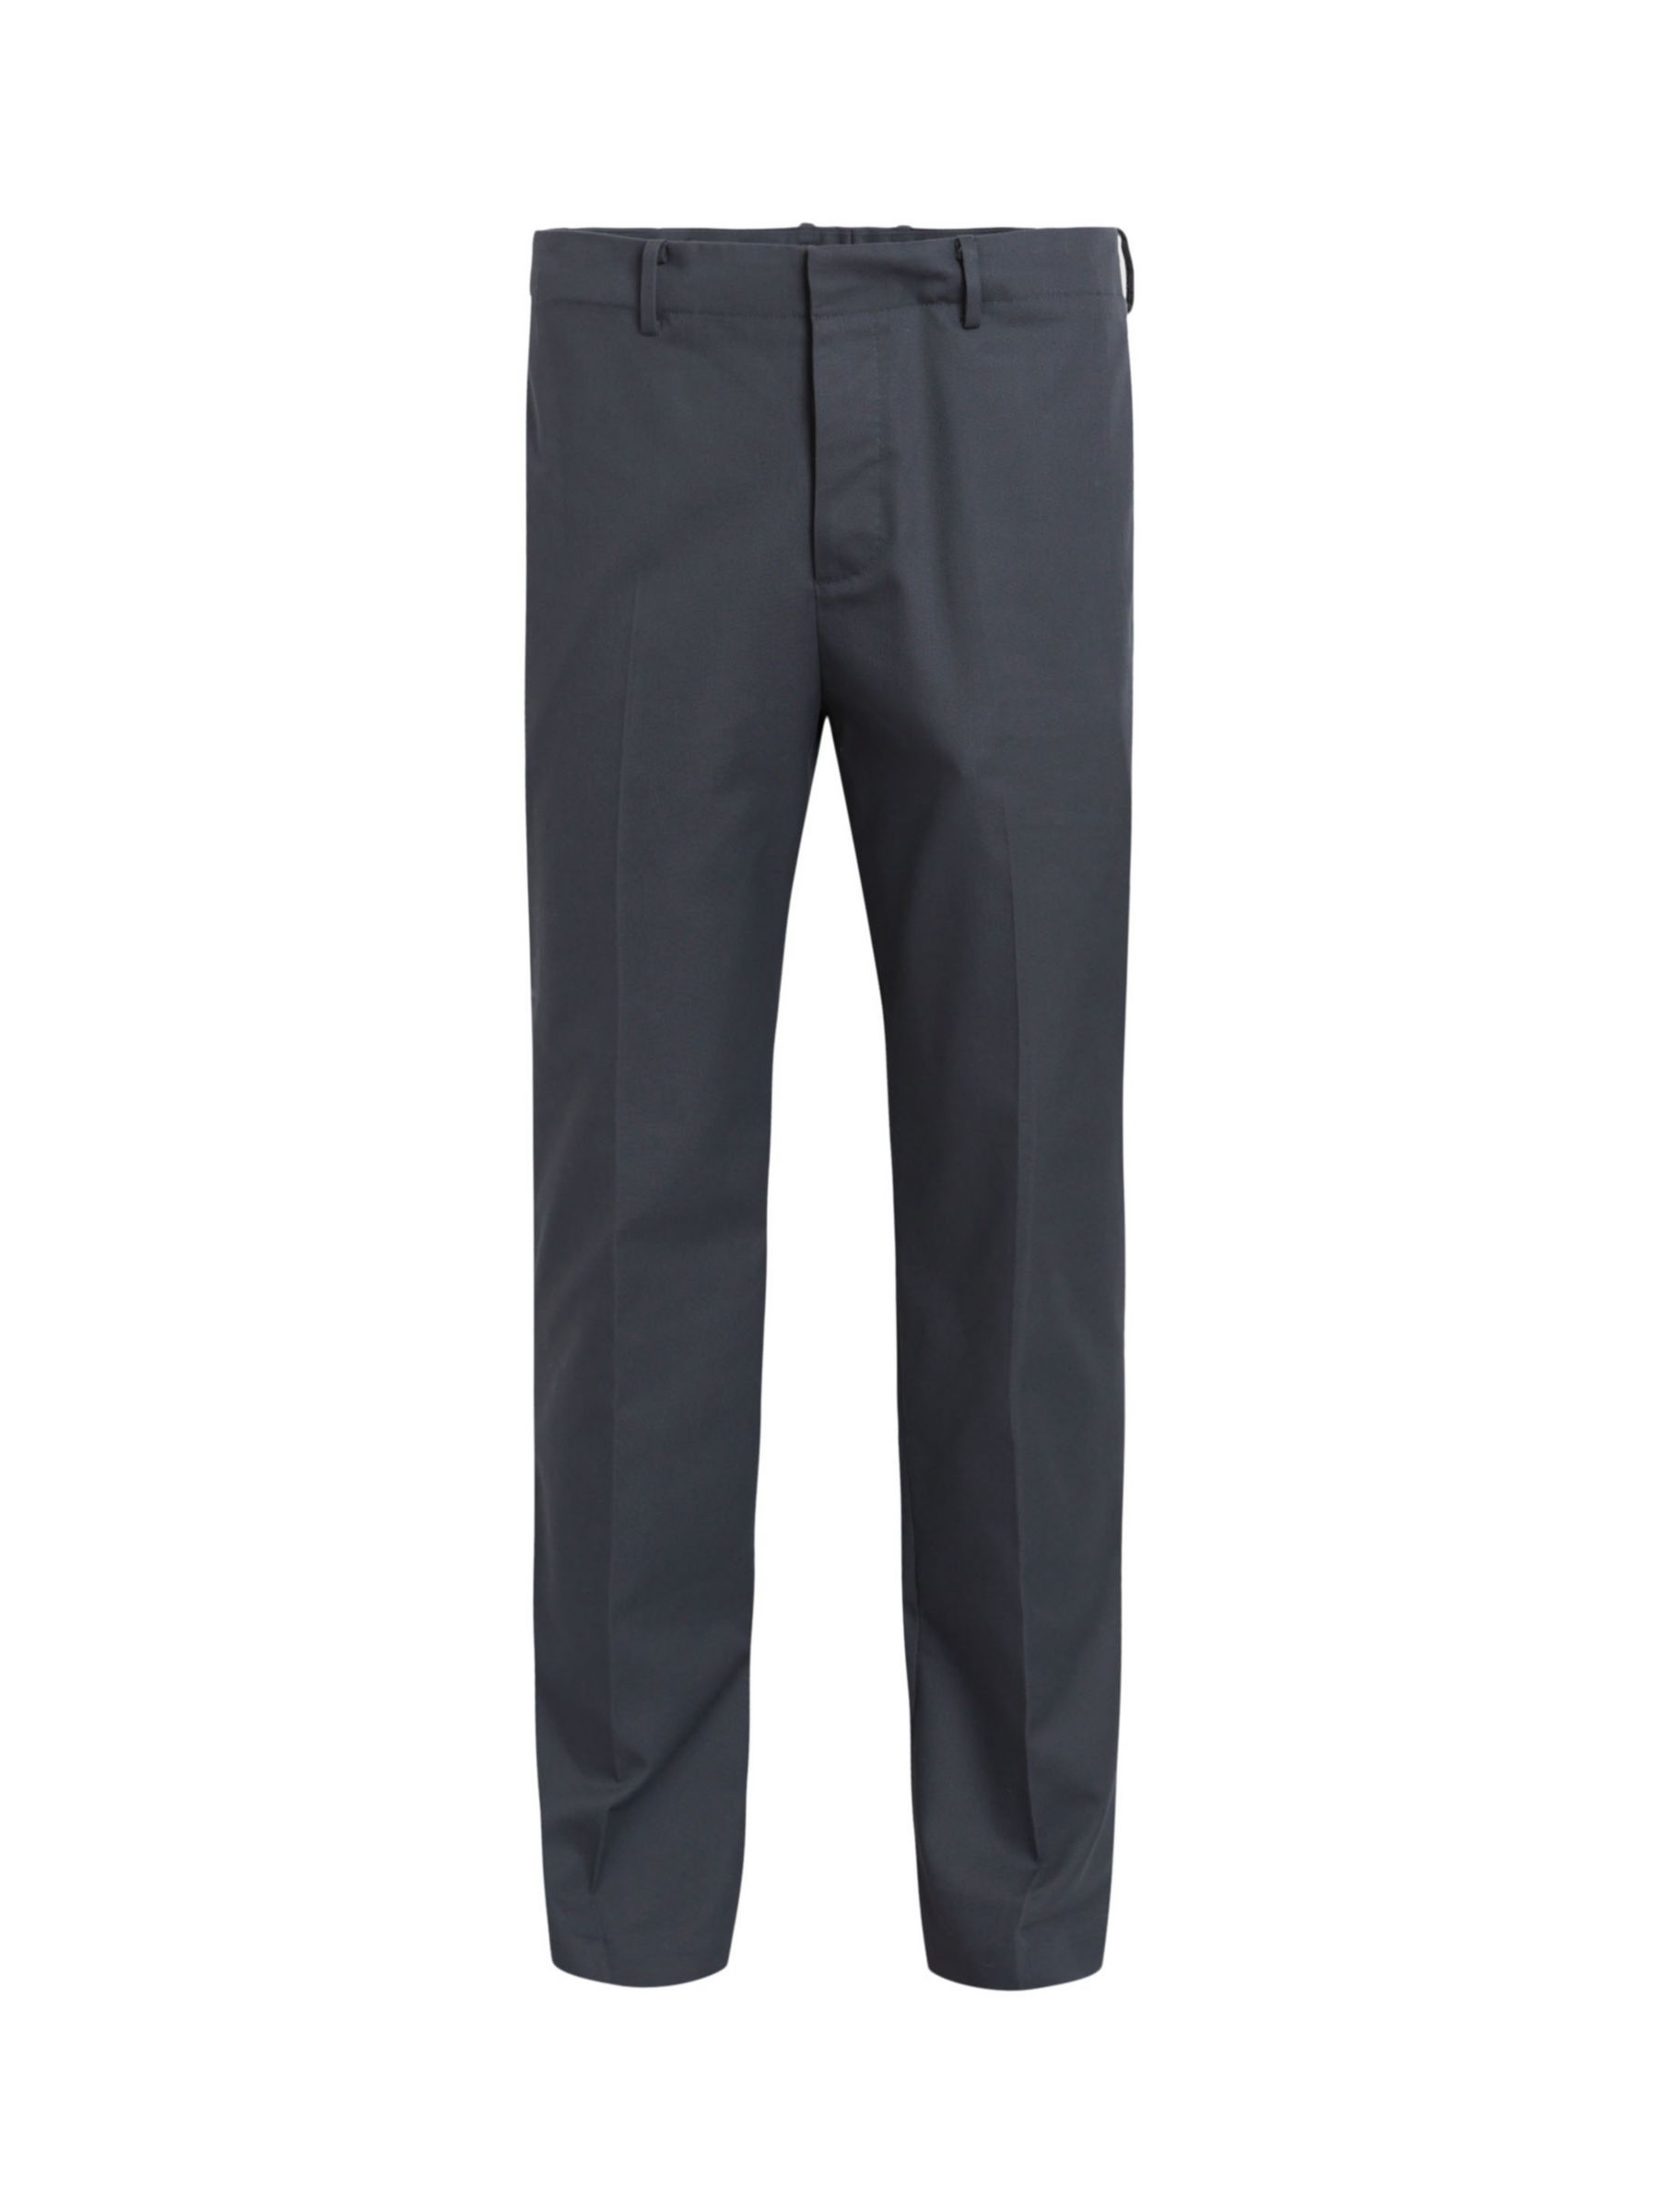 AllSaints Brite Straight Fit Trousers, Slate Grey, 30